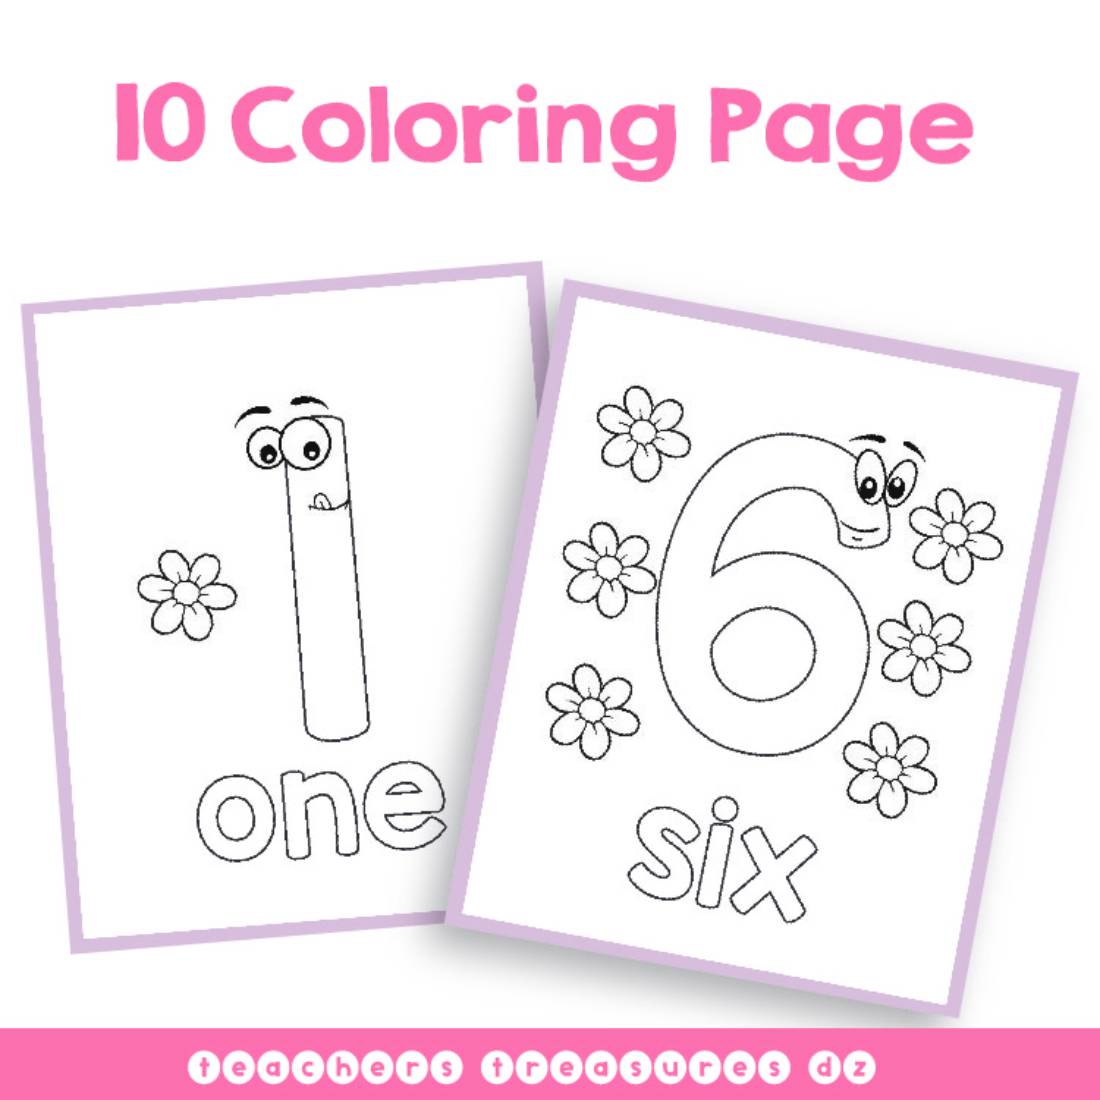 1 - 10 Numbers Printable Coloring Page cover image.